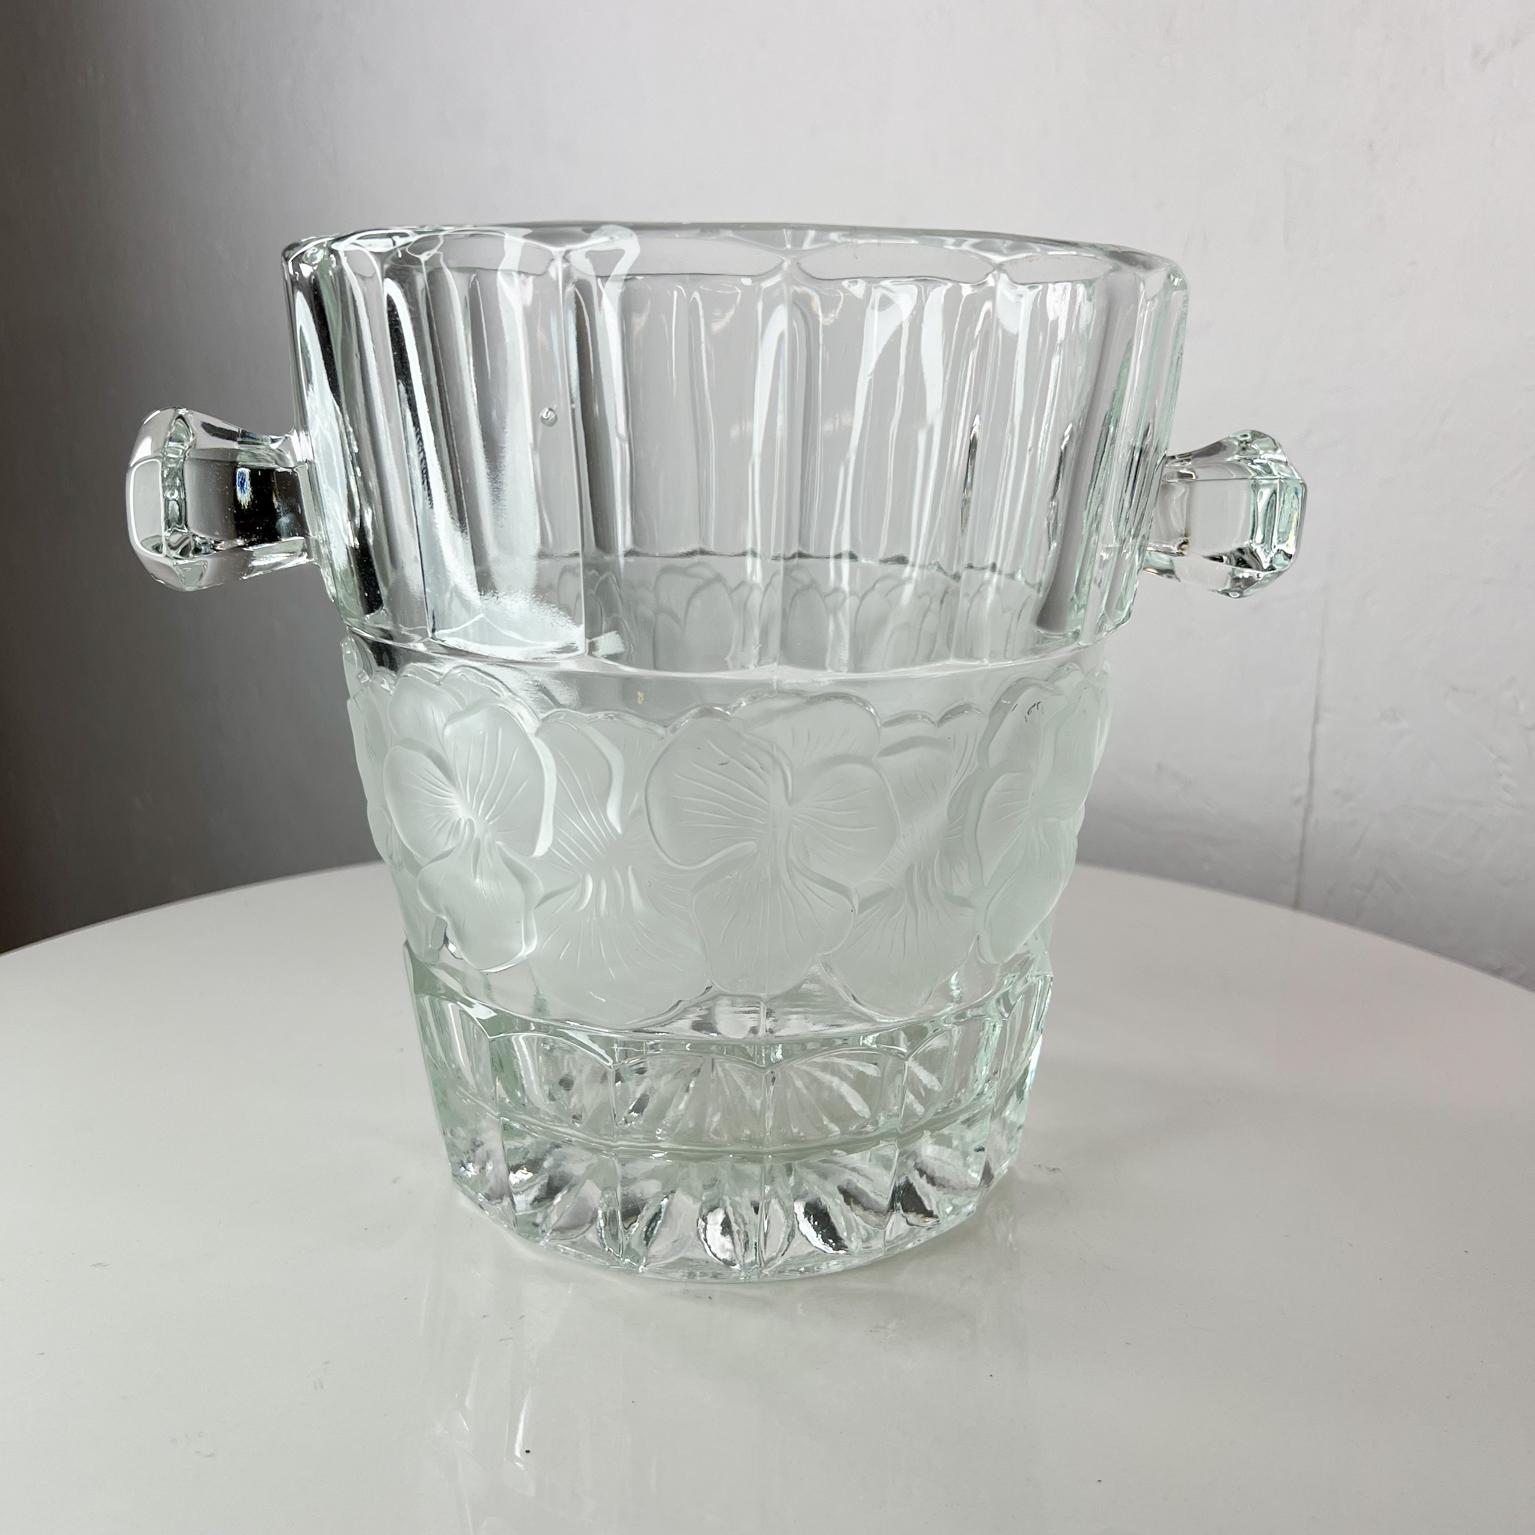 1930s Art Deco French Art glass Crystal champagne bucket floral design with side knob handles
Exquisite vintage
Measures: 8.25 diameter x 11.25 width x 9 tall
Original unrestored preowned vintage condition
Refer to images provided.




